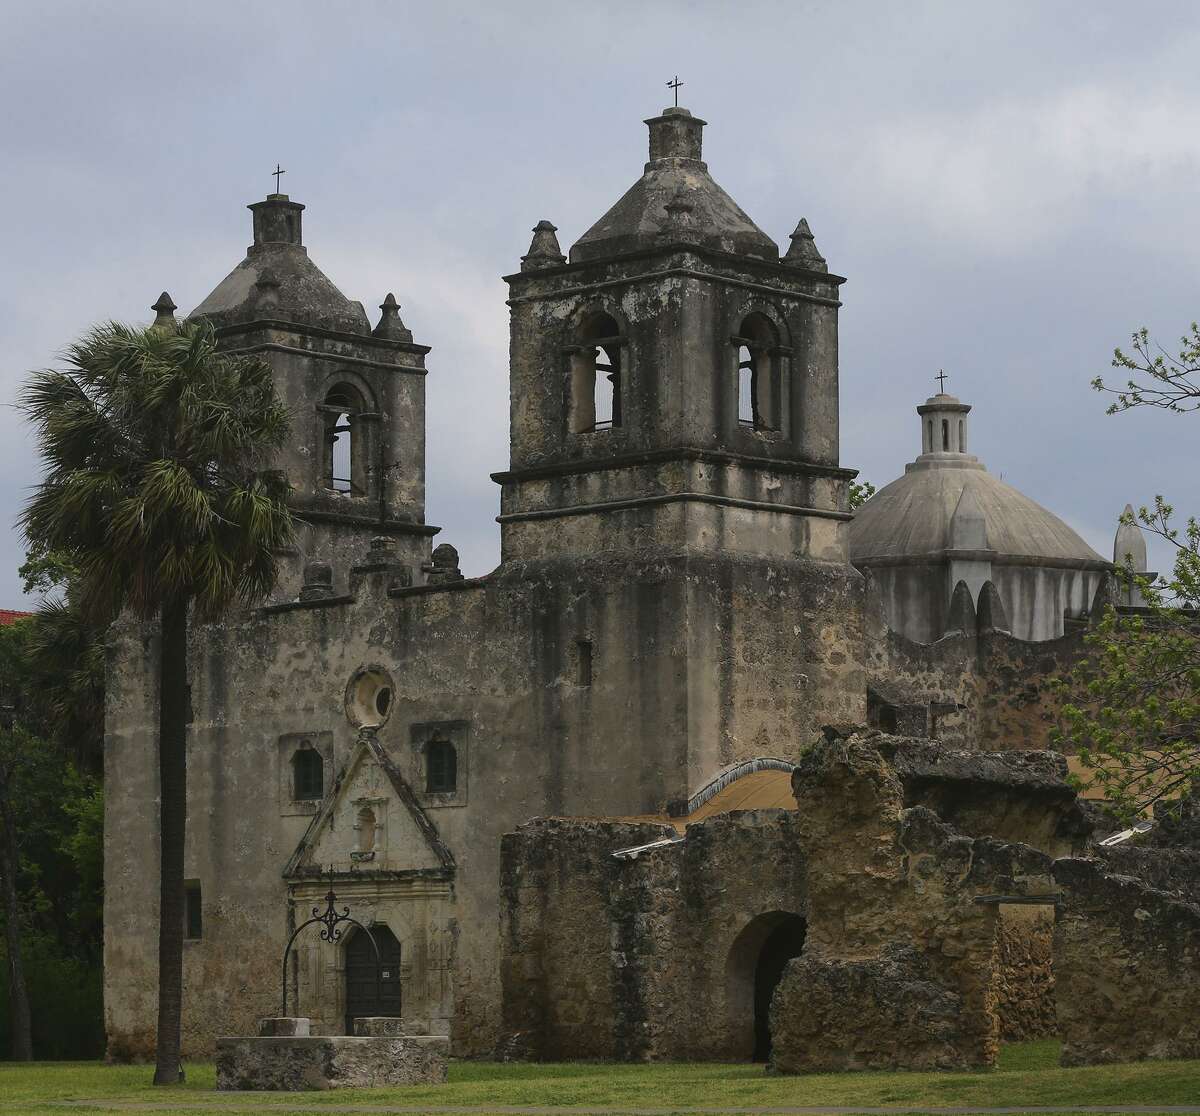 The proposed development would violate height restrictions near Mission Concepción by 11 feet.